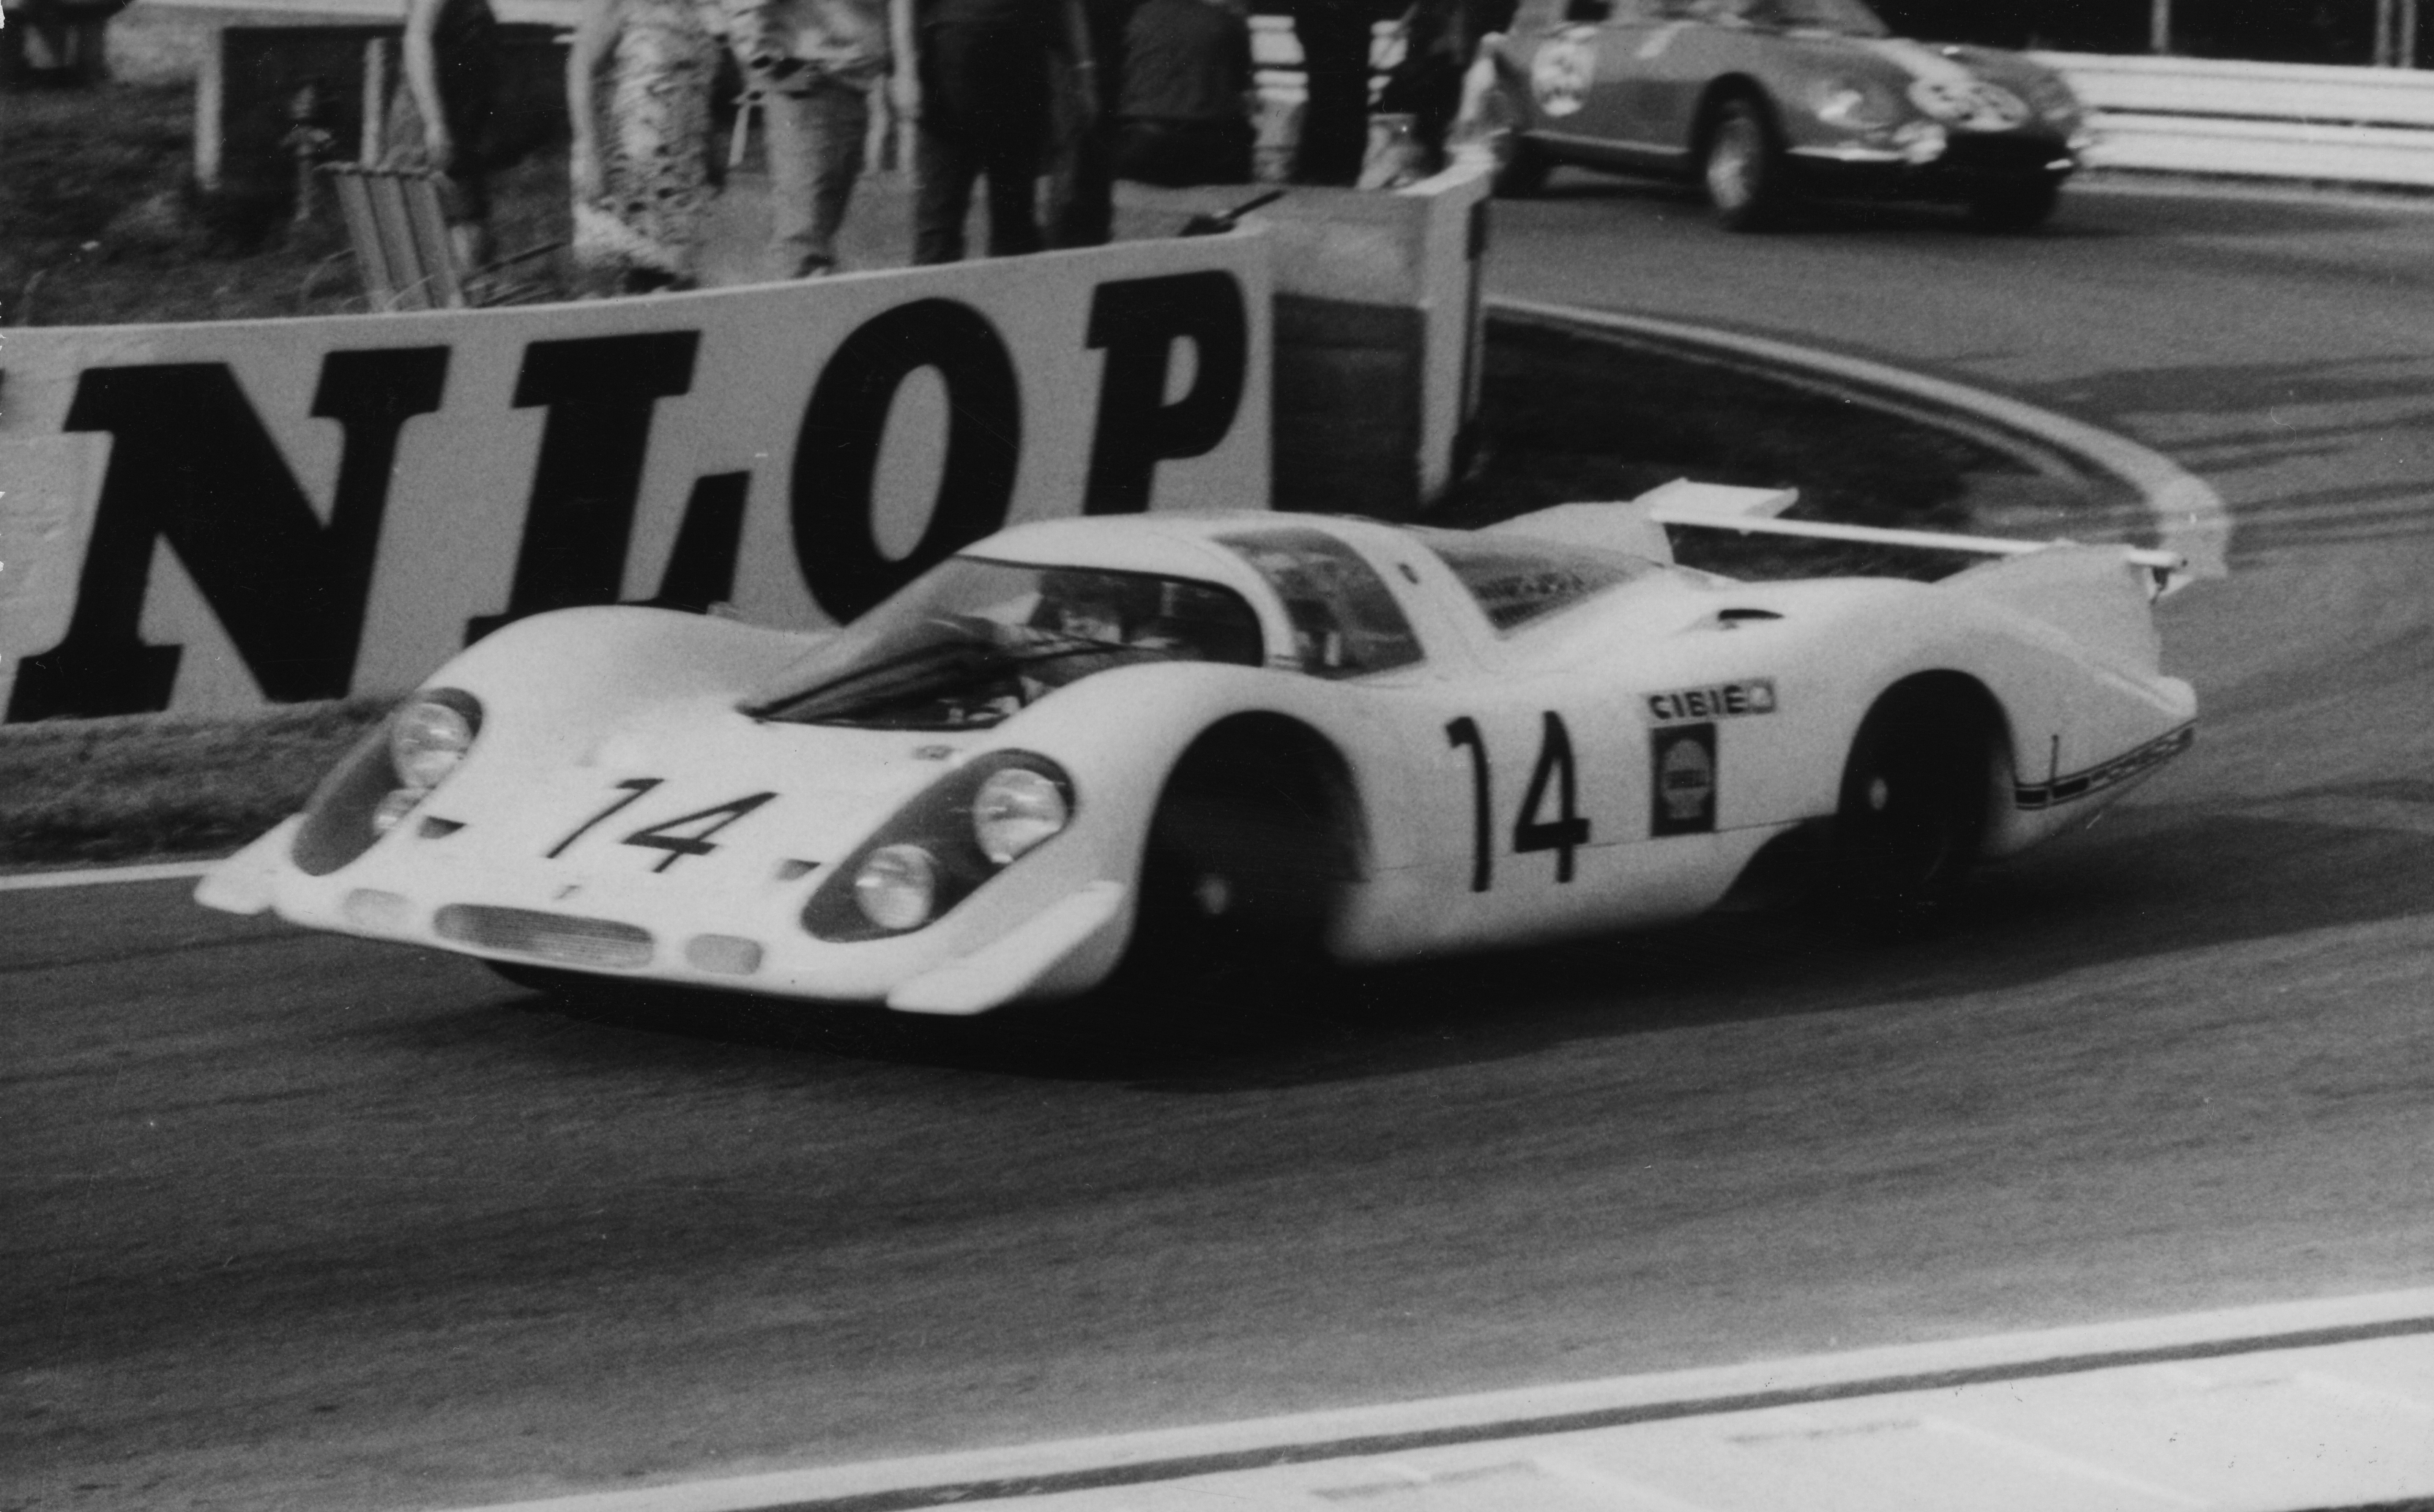 Fiendishly fast, it was also very unstable, and frightened its drivers. Sadly, John Woofle, in the #10 Porsche 917, lost his life at the wheel of the car at the 1969 24 Hours.